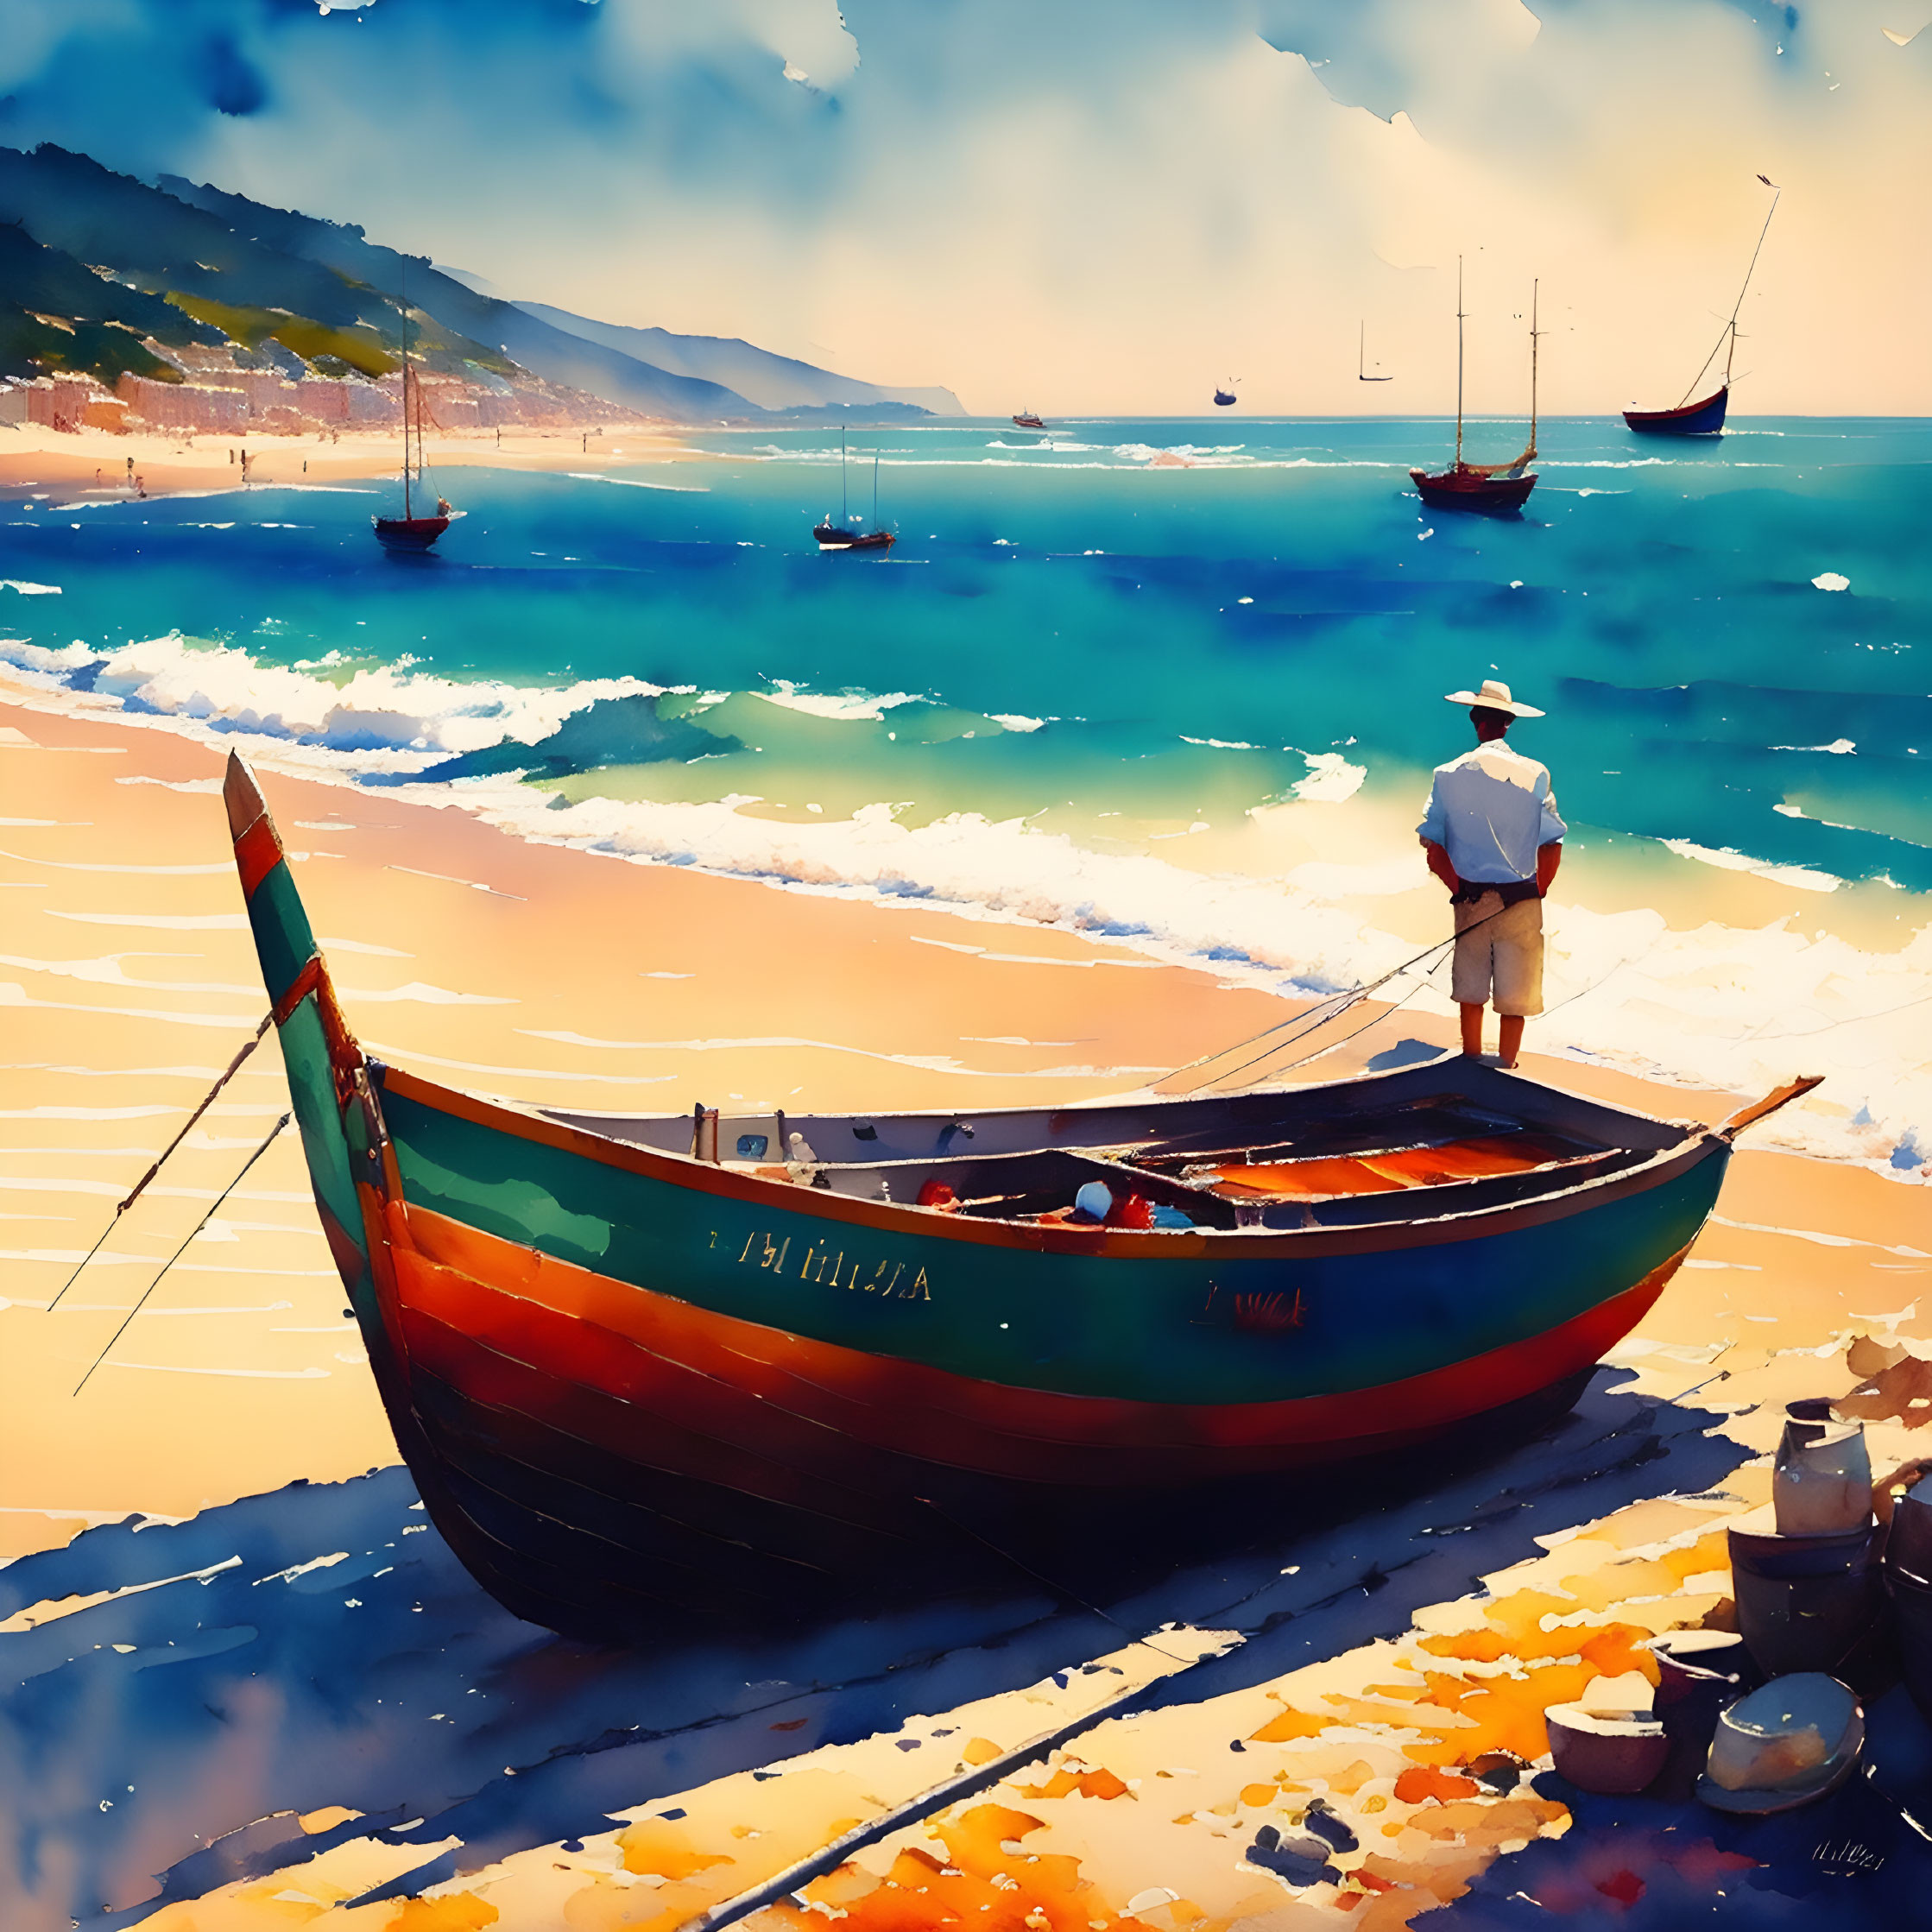 Colorful boat on vibrant beach scene with sailboats and rolling hills